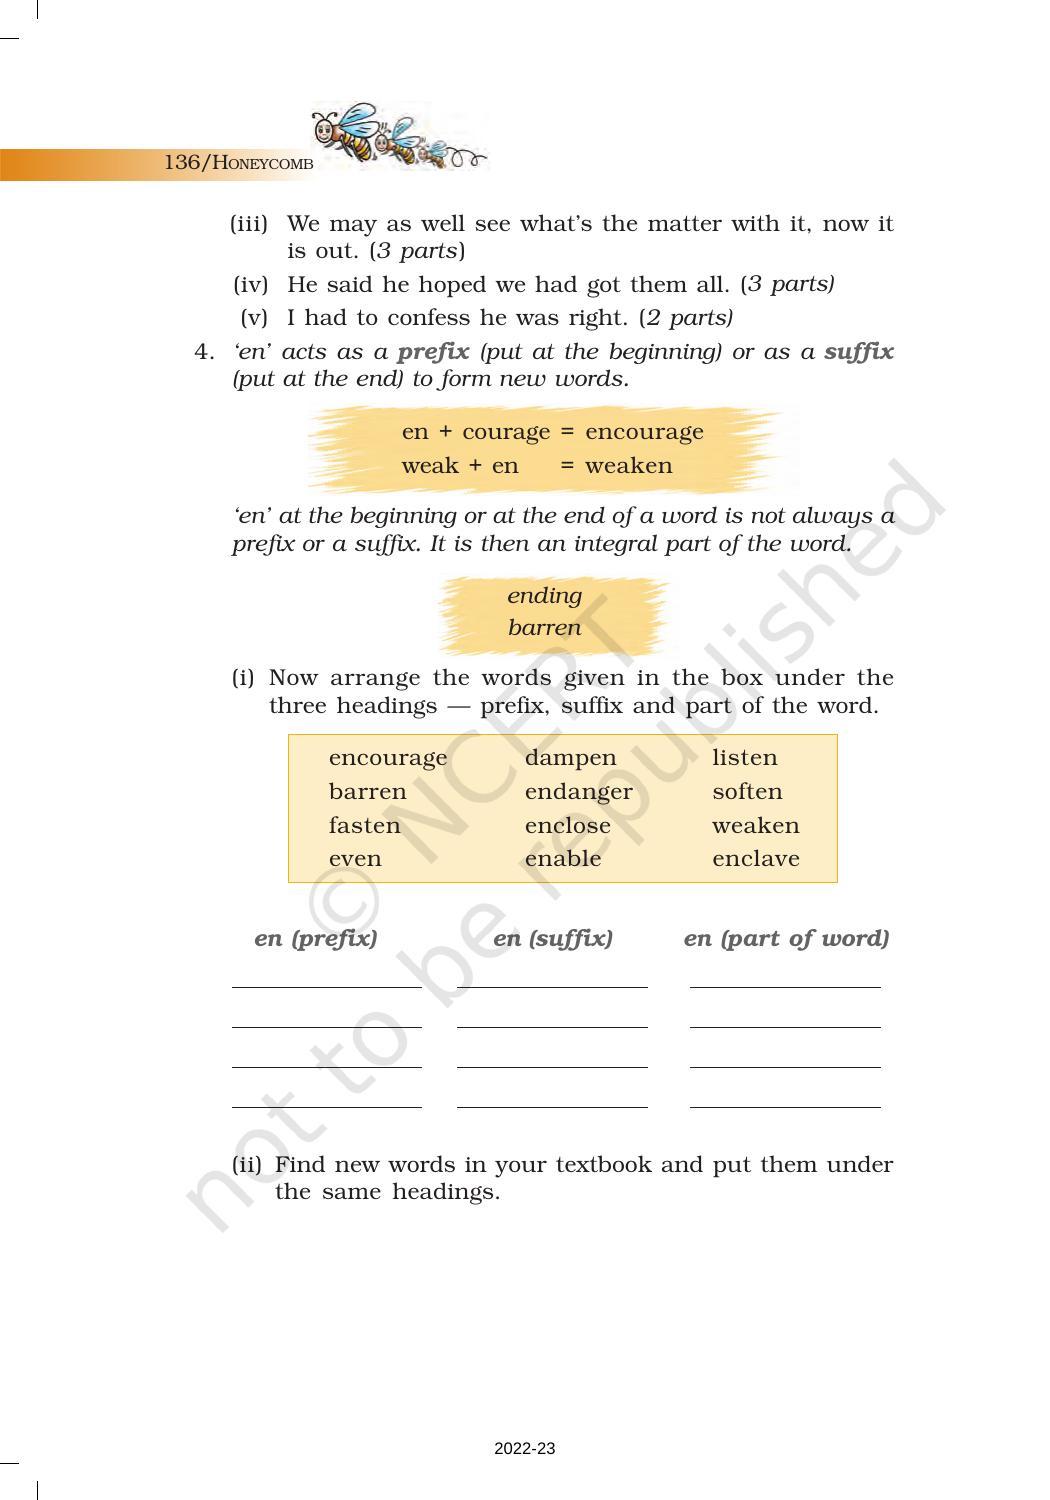 NCERT Book for Class 7 English (Honeycomb): Chapter 9-A Bicycle in Good Repair - Page 11